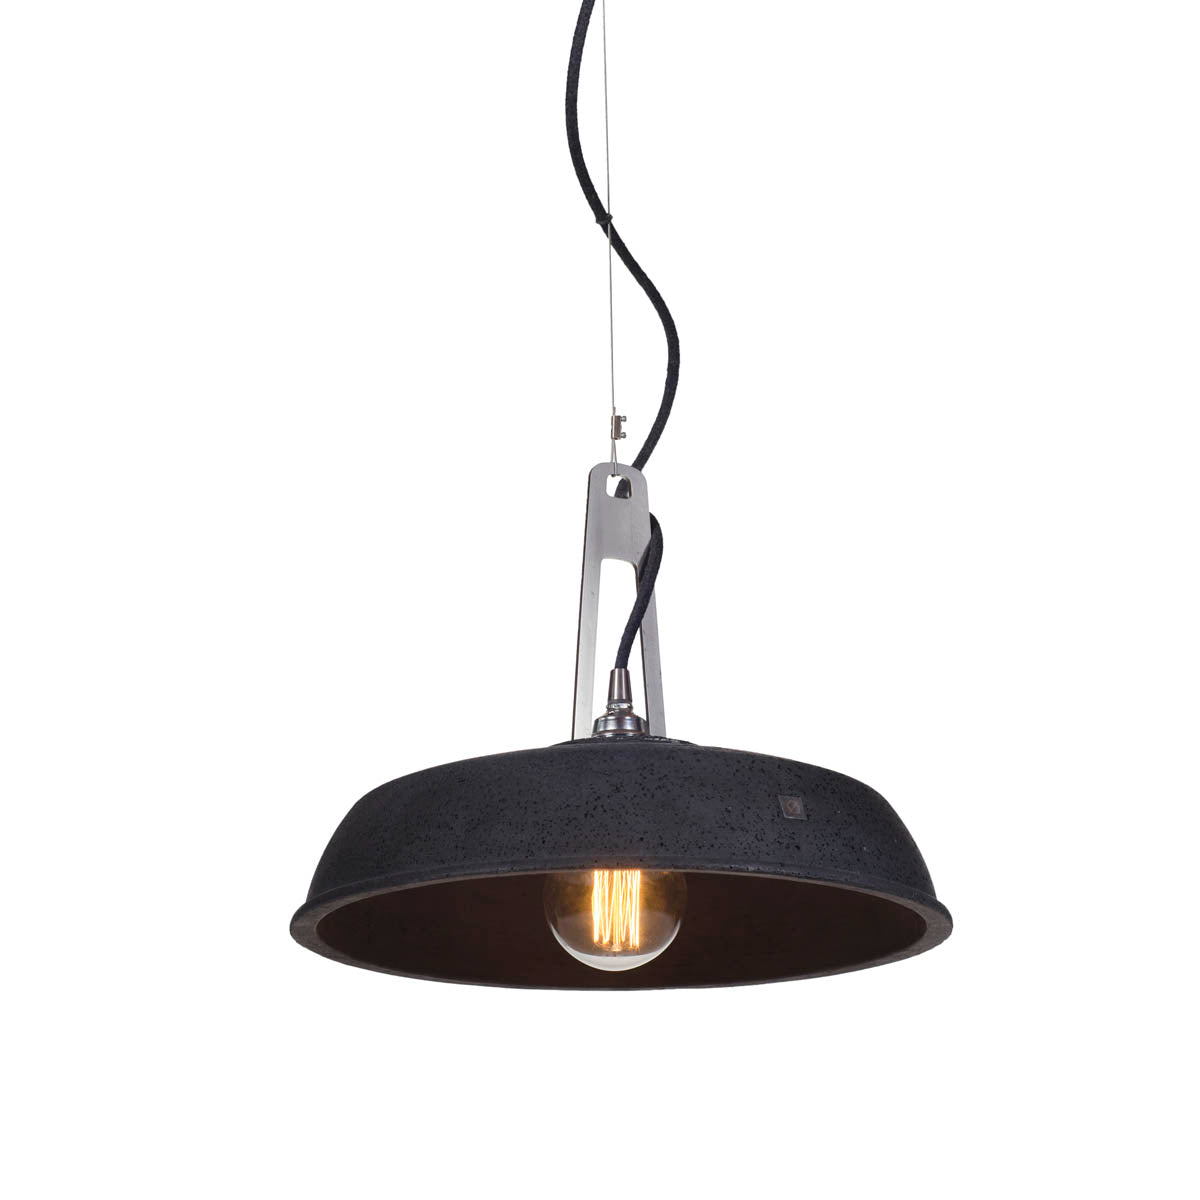 Industriola is a unique hanging lamp that will attract every look with its appearance. The concrete lampshade, whose color can be selected, will perfectly complement any industrial or loft interior. Steel finishing elements emphasize the factory nature of this lighting. Nickel stopwatch at the top allows hanging at any height. Manual performance ensures the uniqueness of each copy.